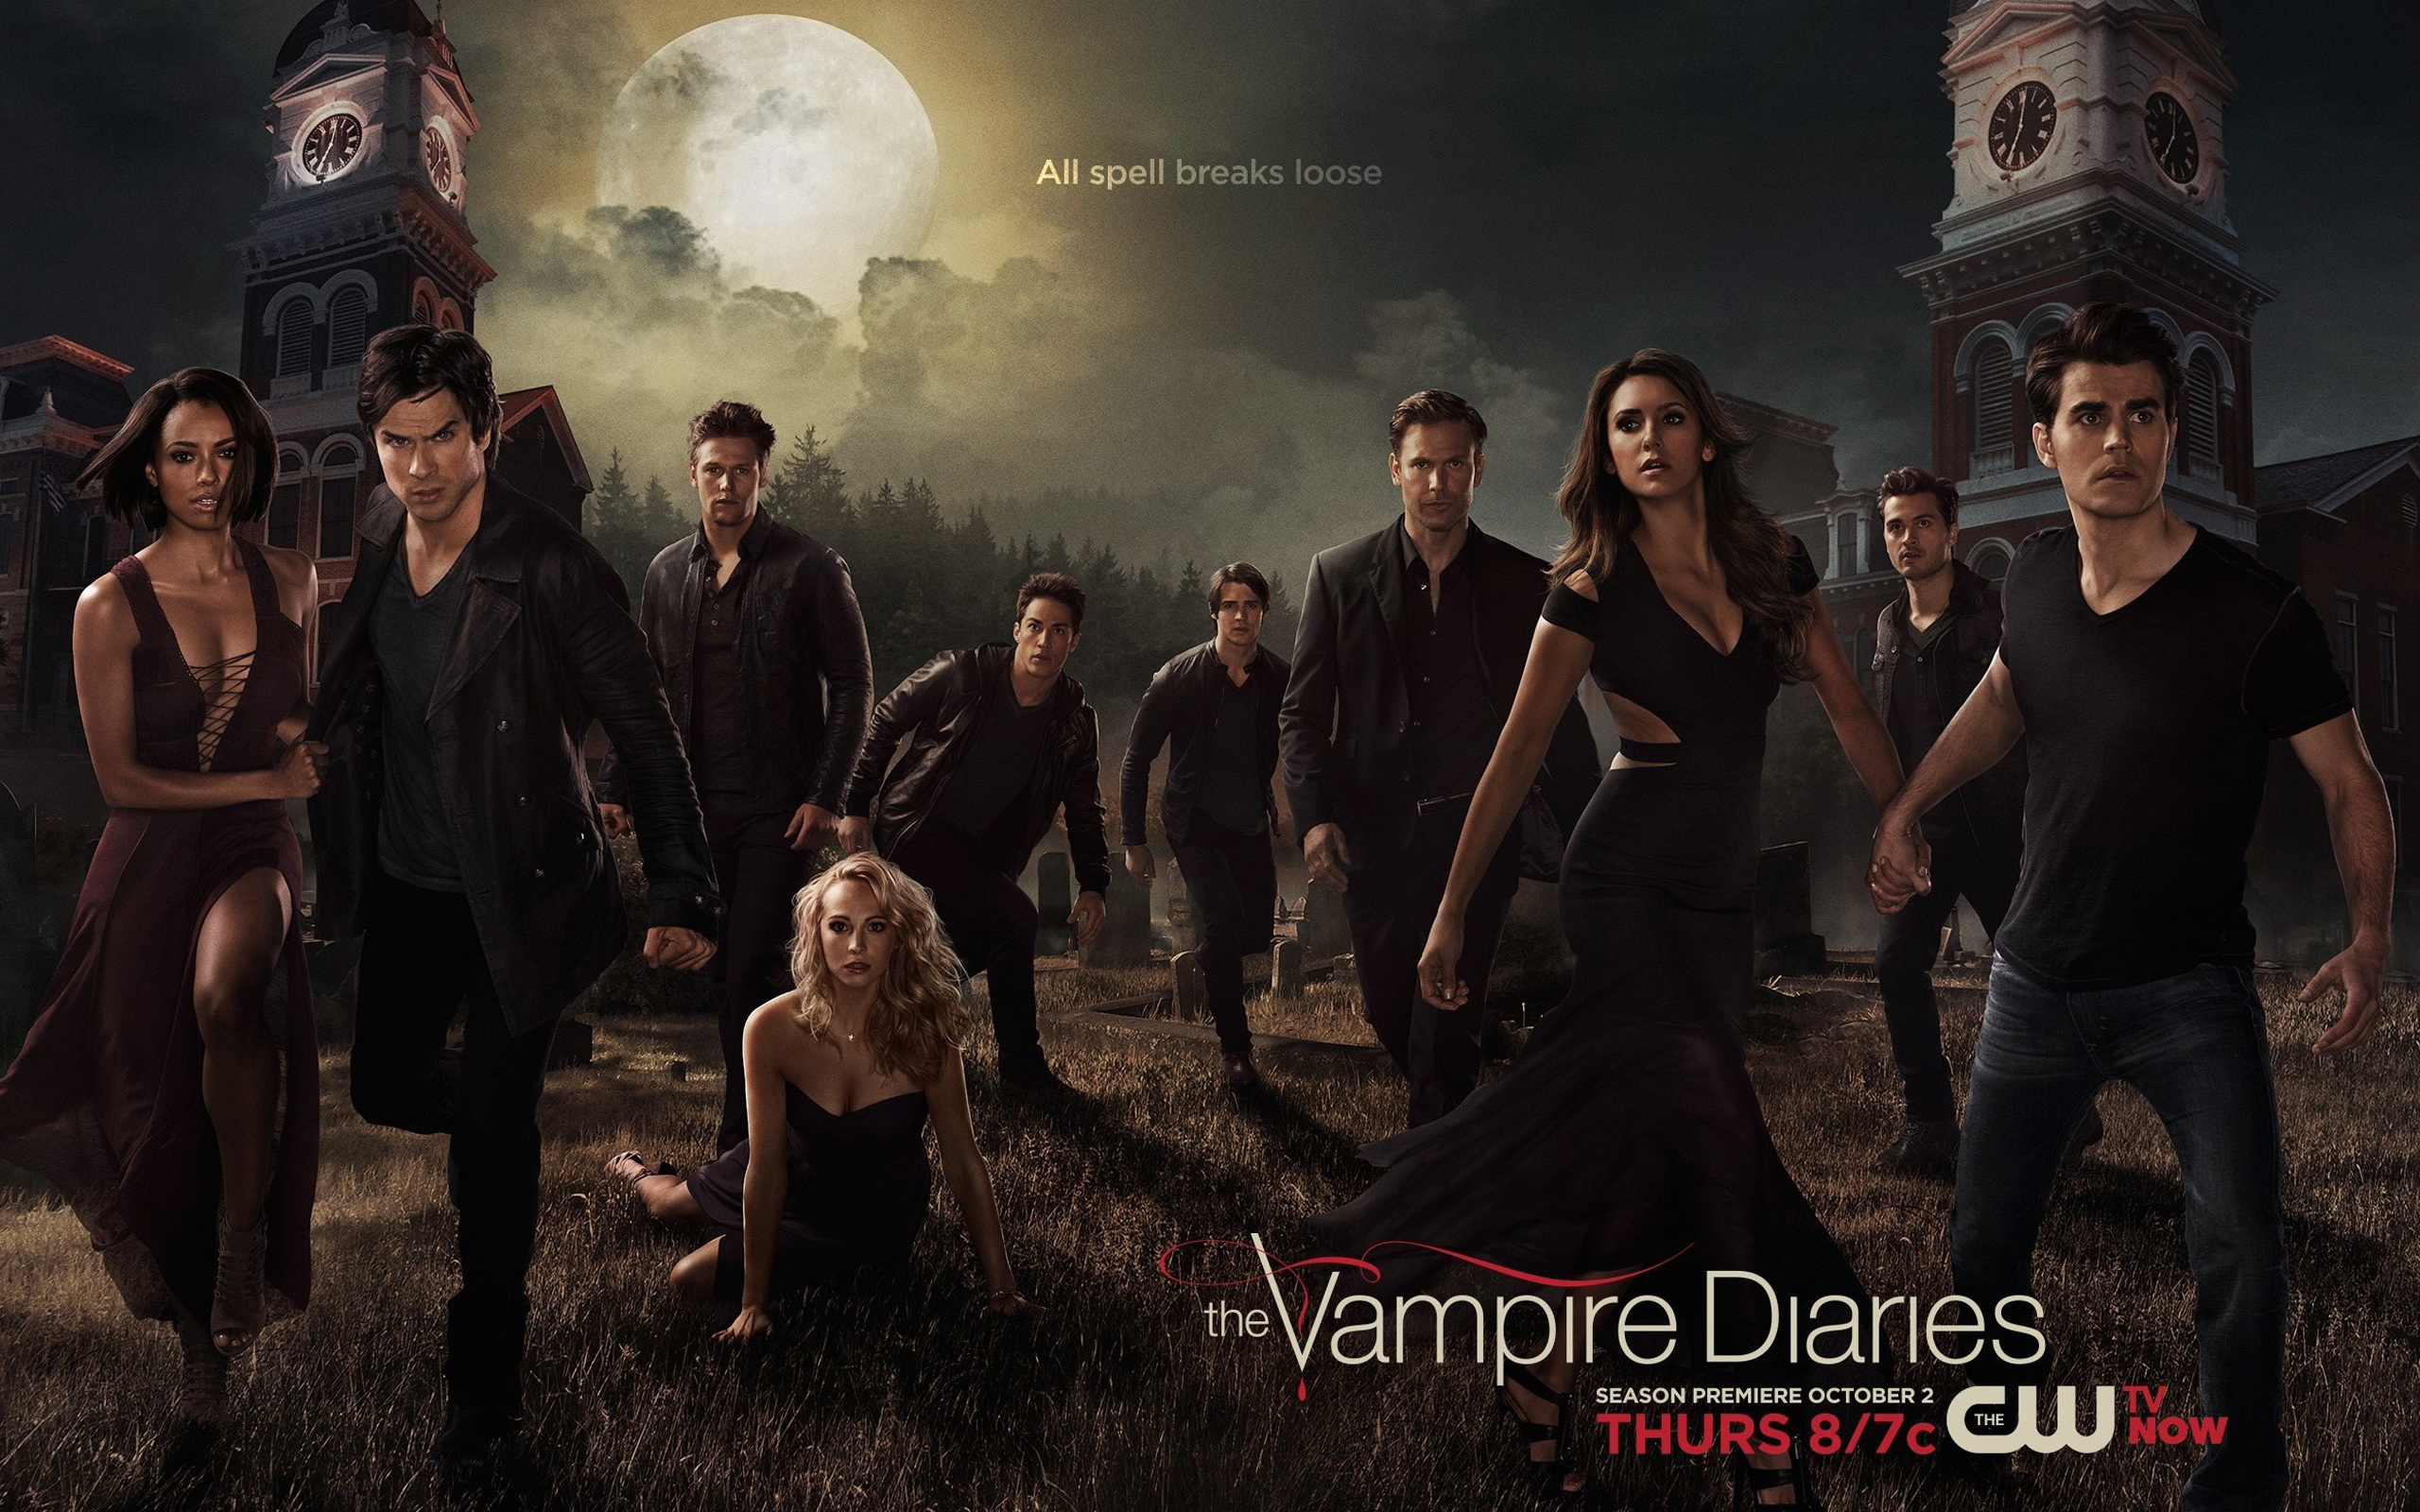 The Vampire Diaries is an American supernatural drama television series developed by Kevin Williamson and Julie Plec, based on the popular book series by L. J. Smith. - Vampire